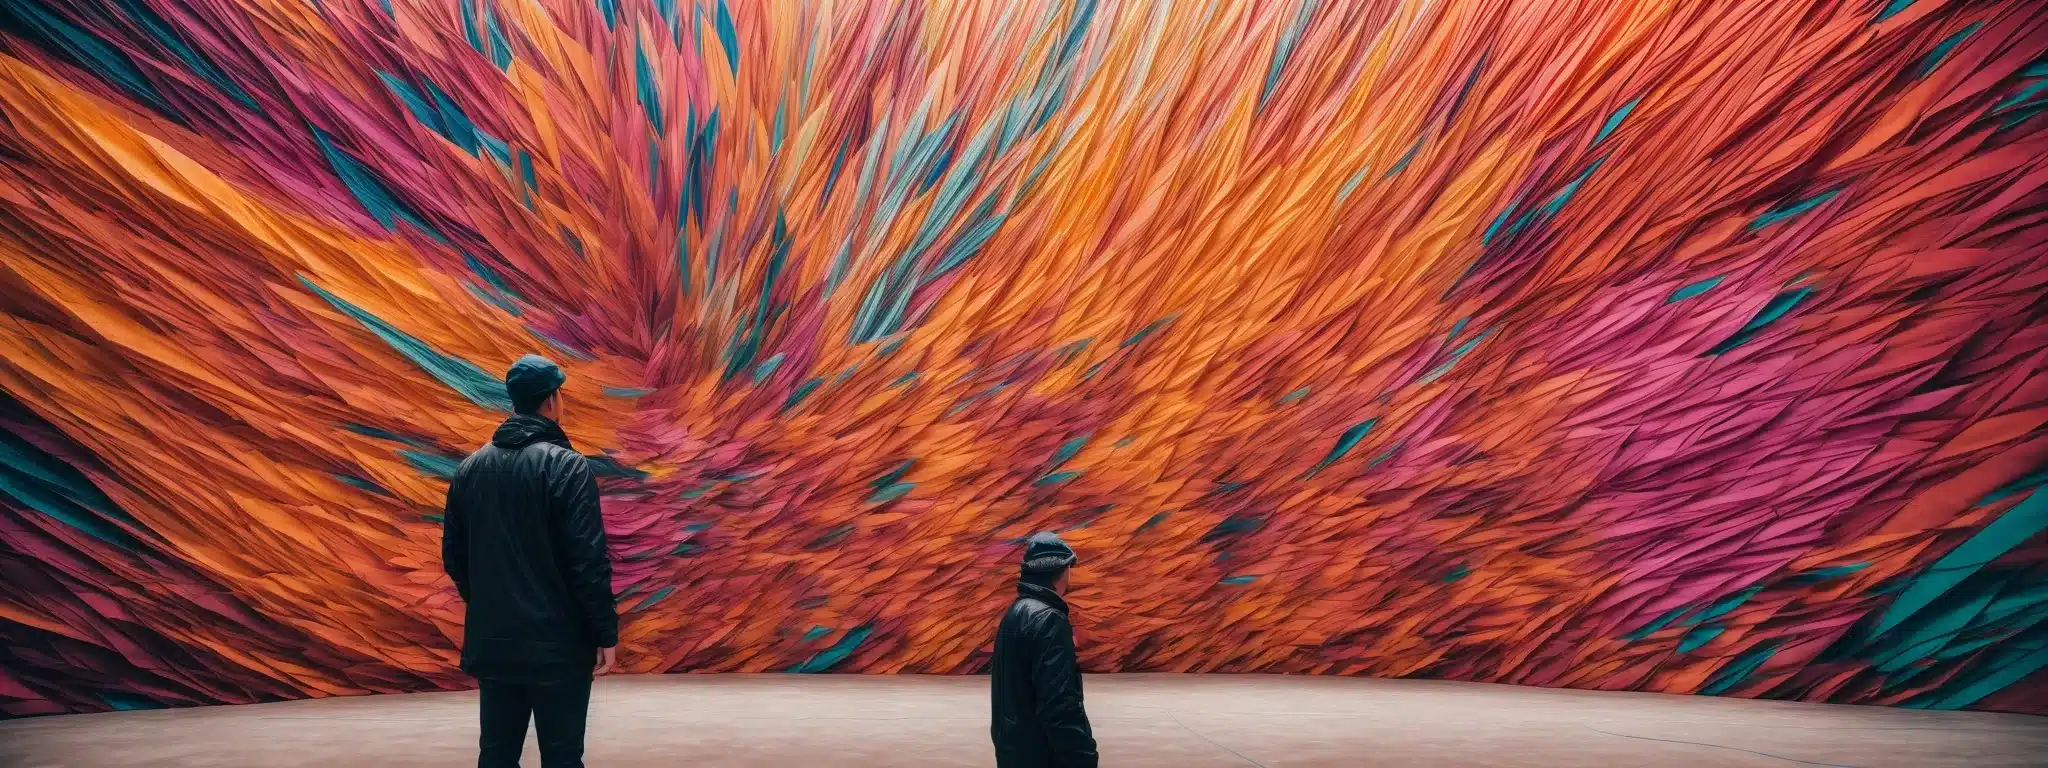 A Person Stands Before A Massive, Abstract Mural That Bursts With Vibrant Colors, Symbolizing A Creative And Distinctive Brand Identity Taking Shape.